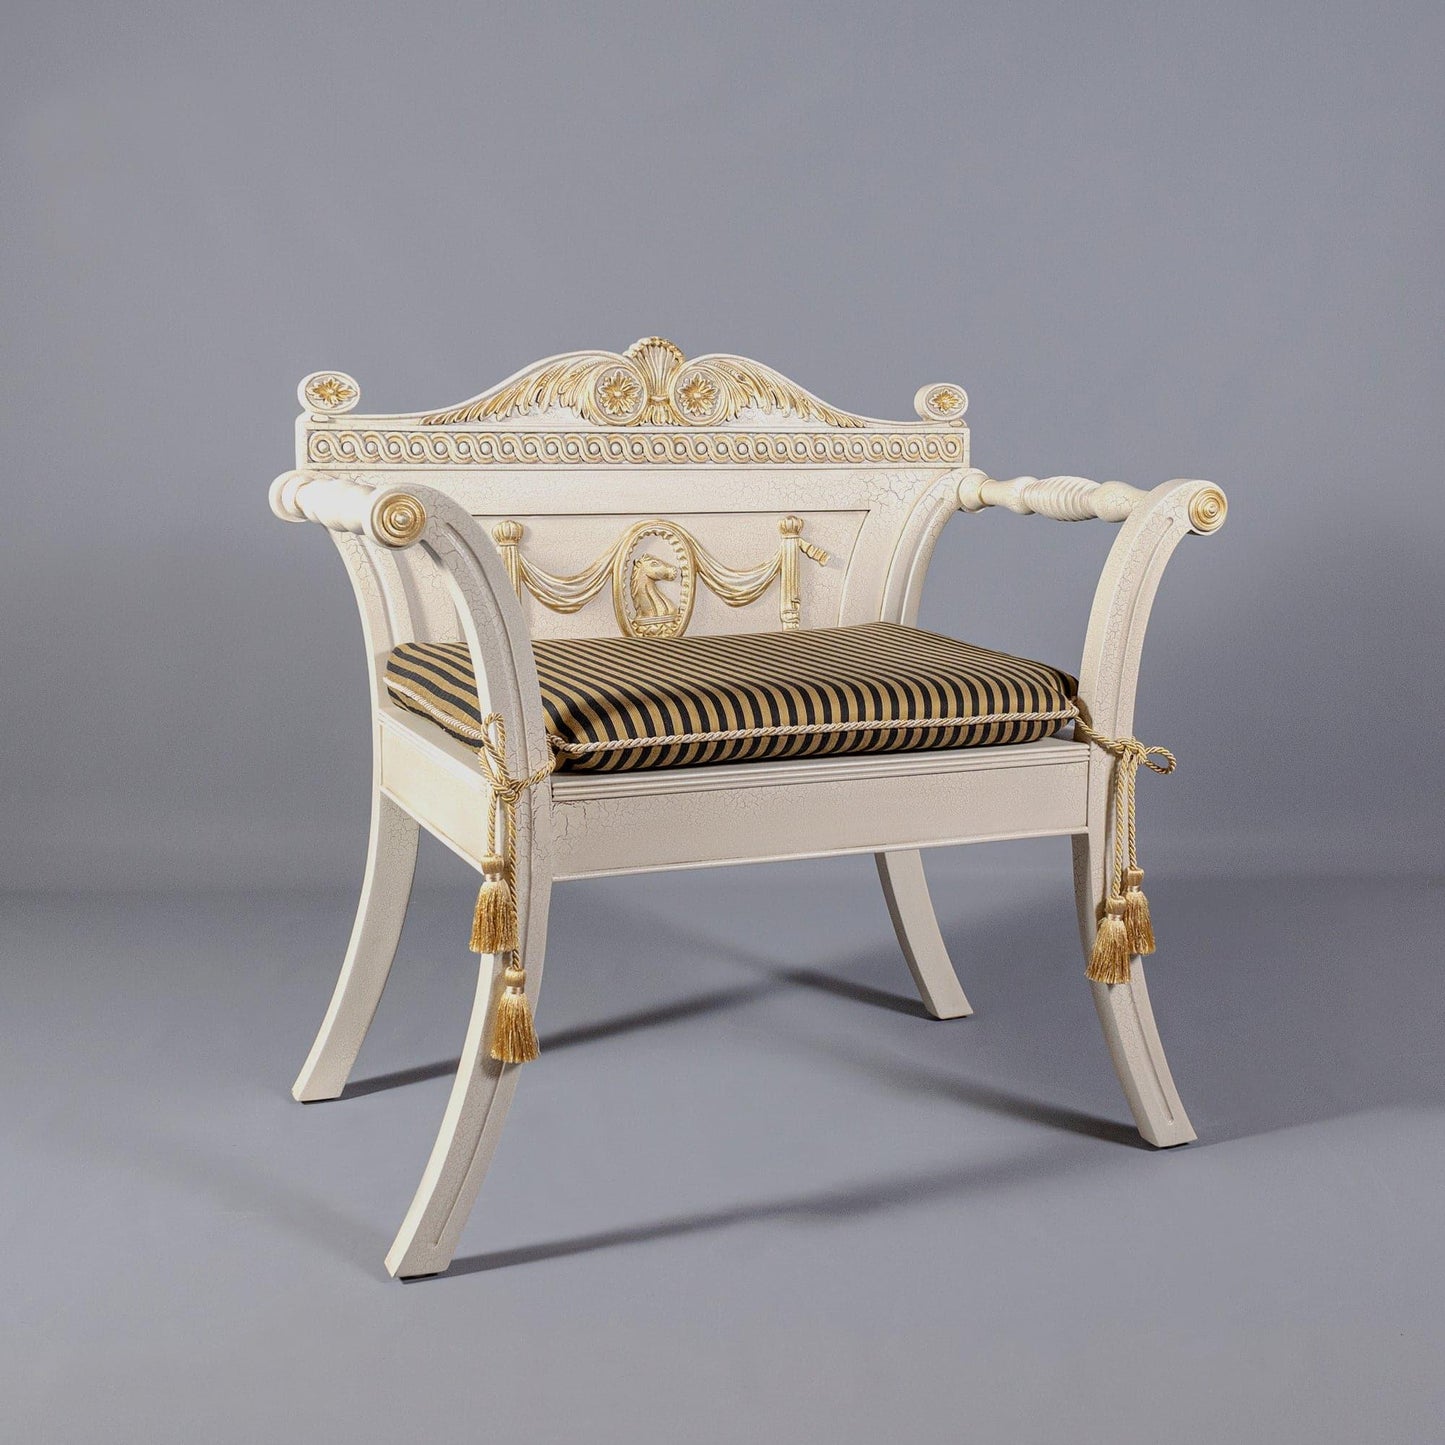 REGENCY HALL CHAIR - House of Chippendale